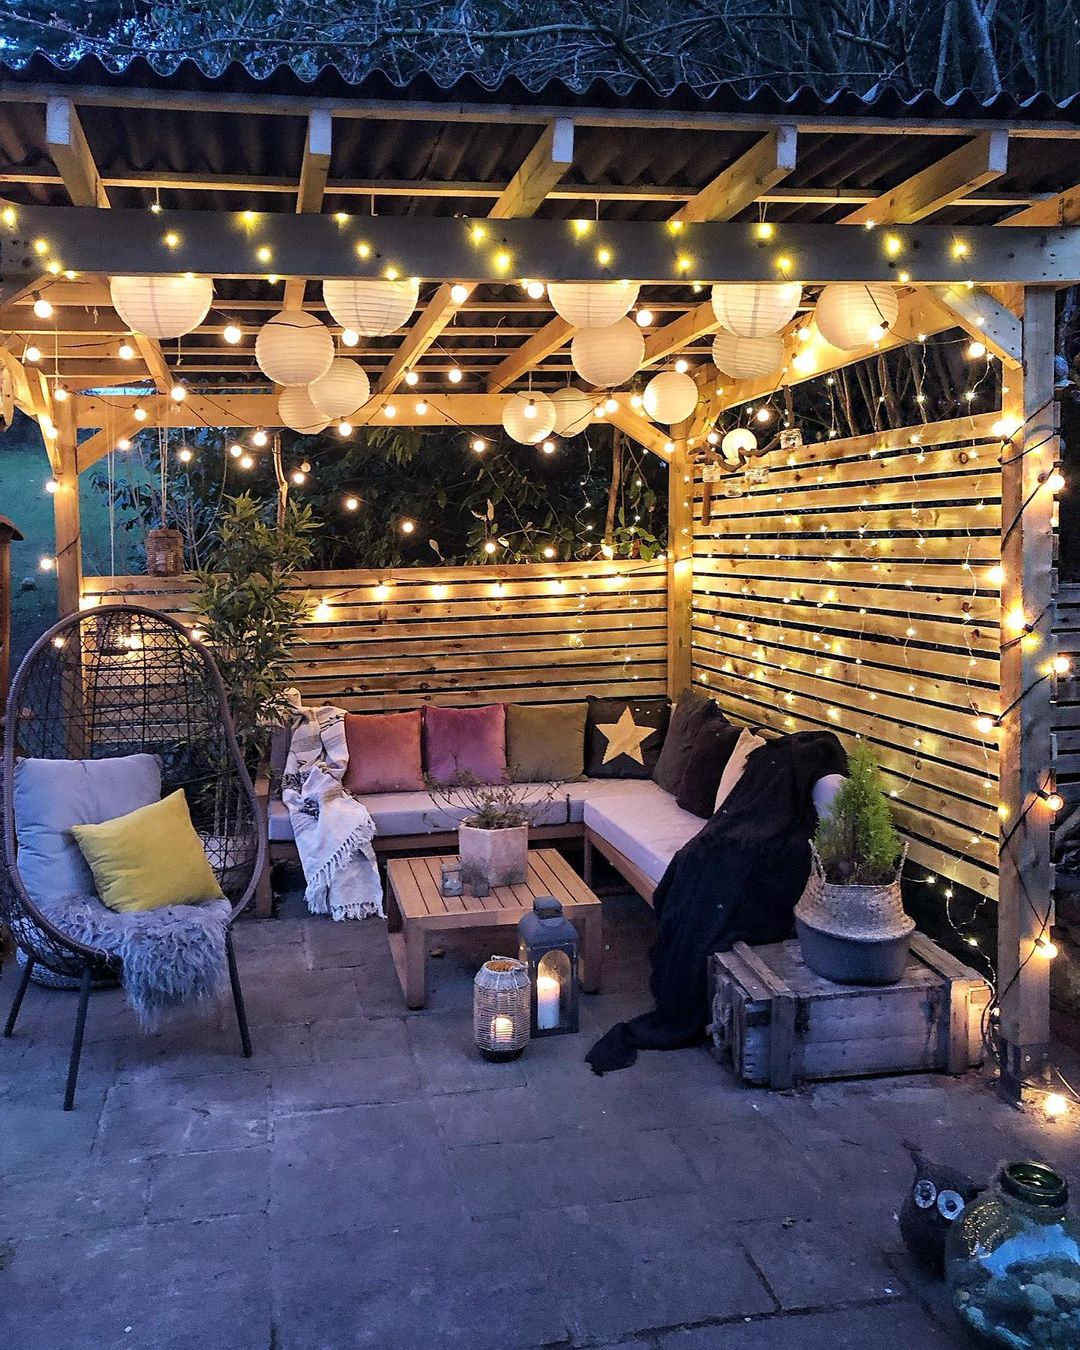 A covered backyard patio decorated with string lights. Photo by Instagram user @mydarkhome_